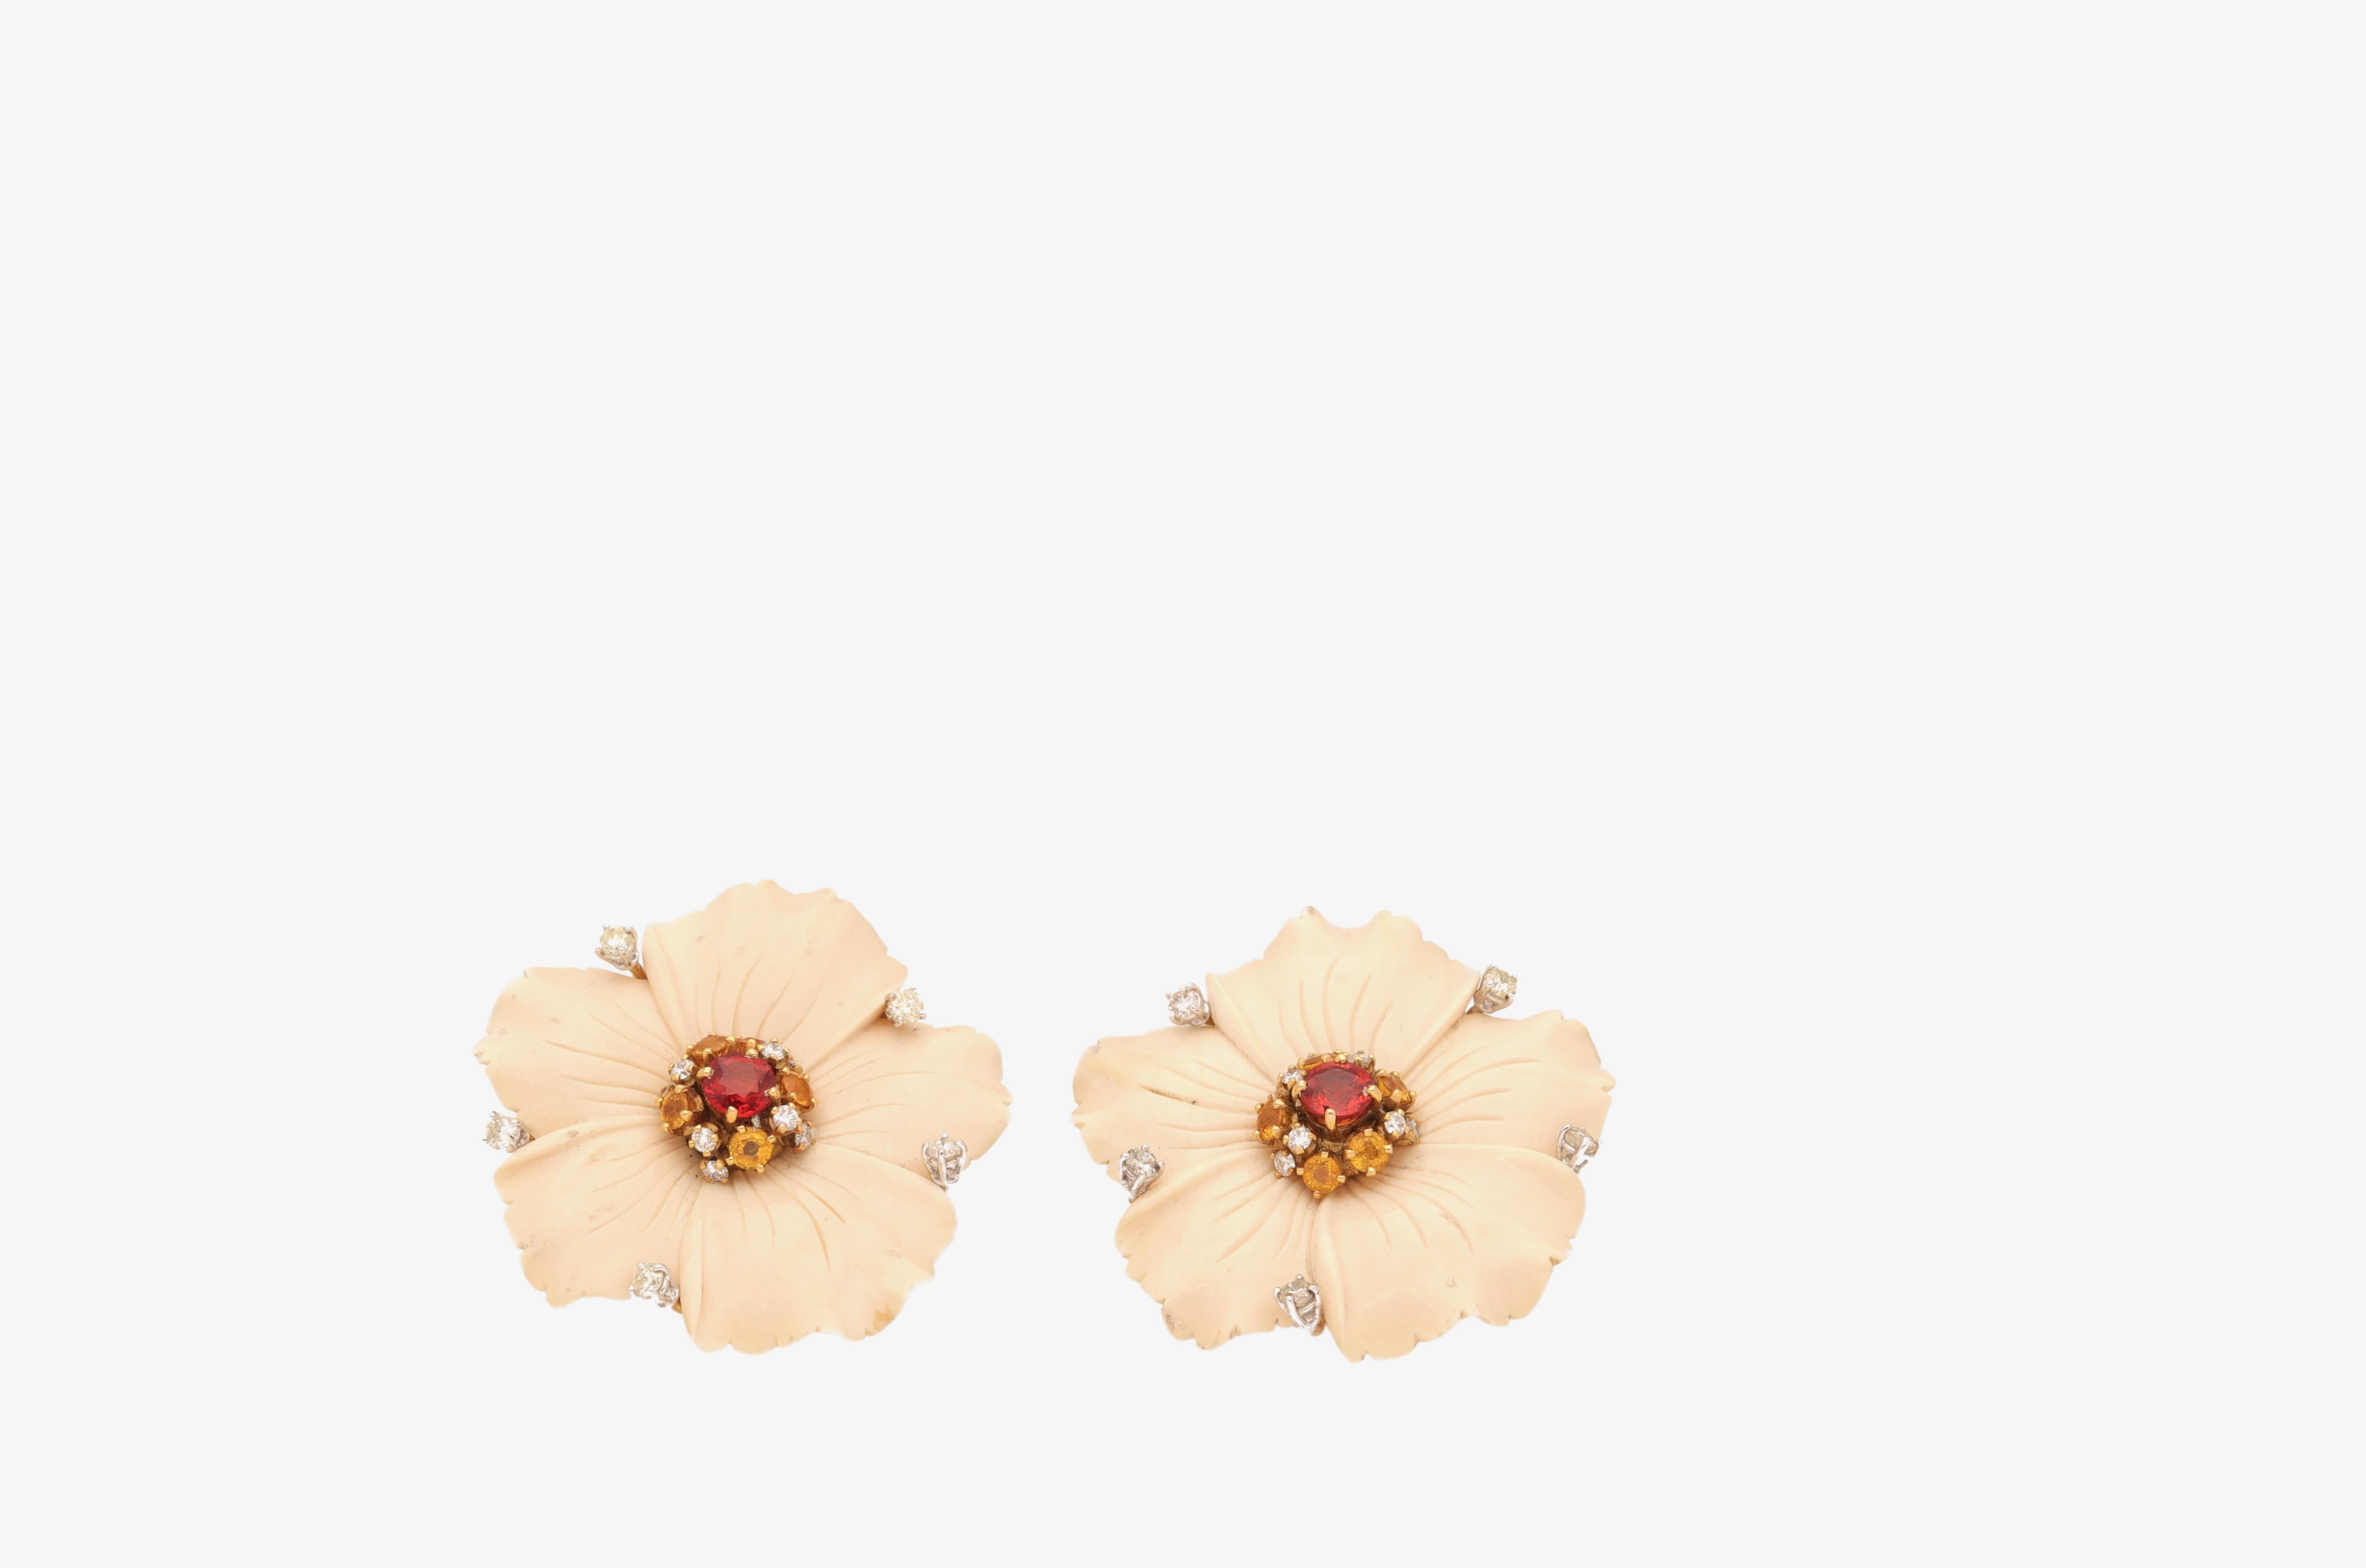 18 kt. yellow gold earrings with 1.00 carat of round-cut diamonds and multicolored sapphires.
This beautiful pair of earrings is hand-made in Italy and has a flower shape.
The flower is realized with an engraved resin paste. 